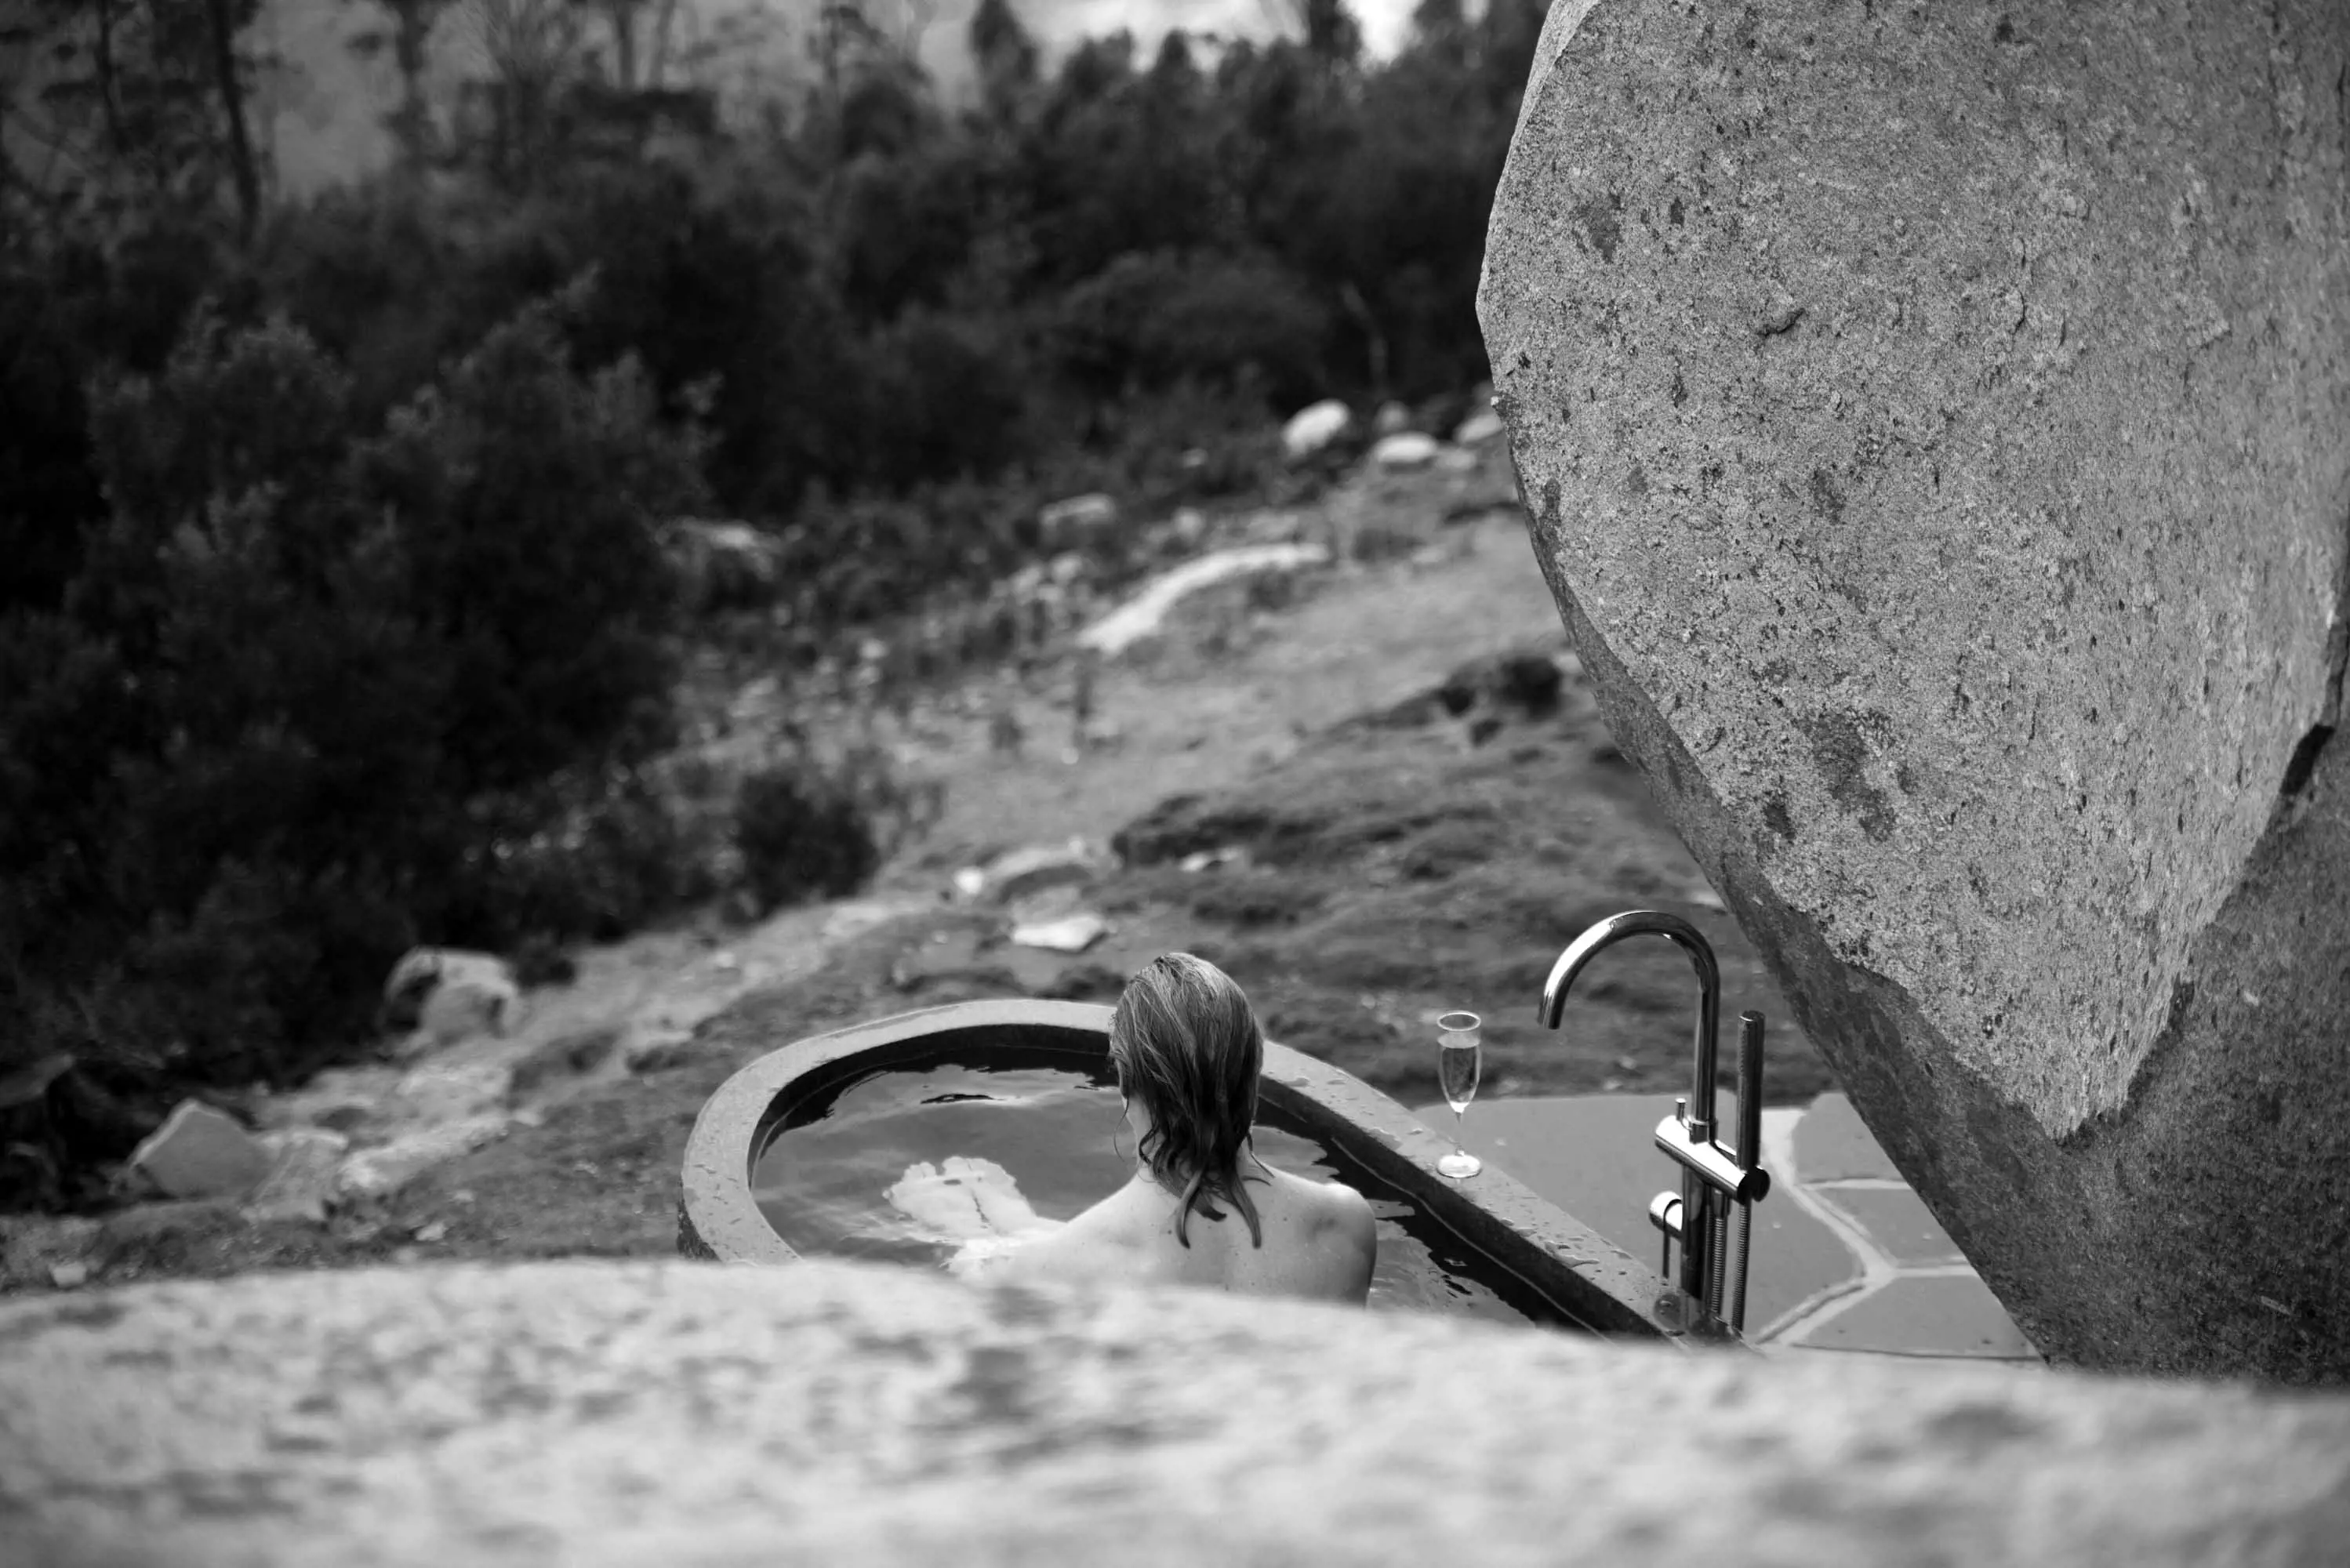 A woman relaxes in a large, stone bath in the shade of large rocks, overlooking bushland.